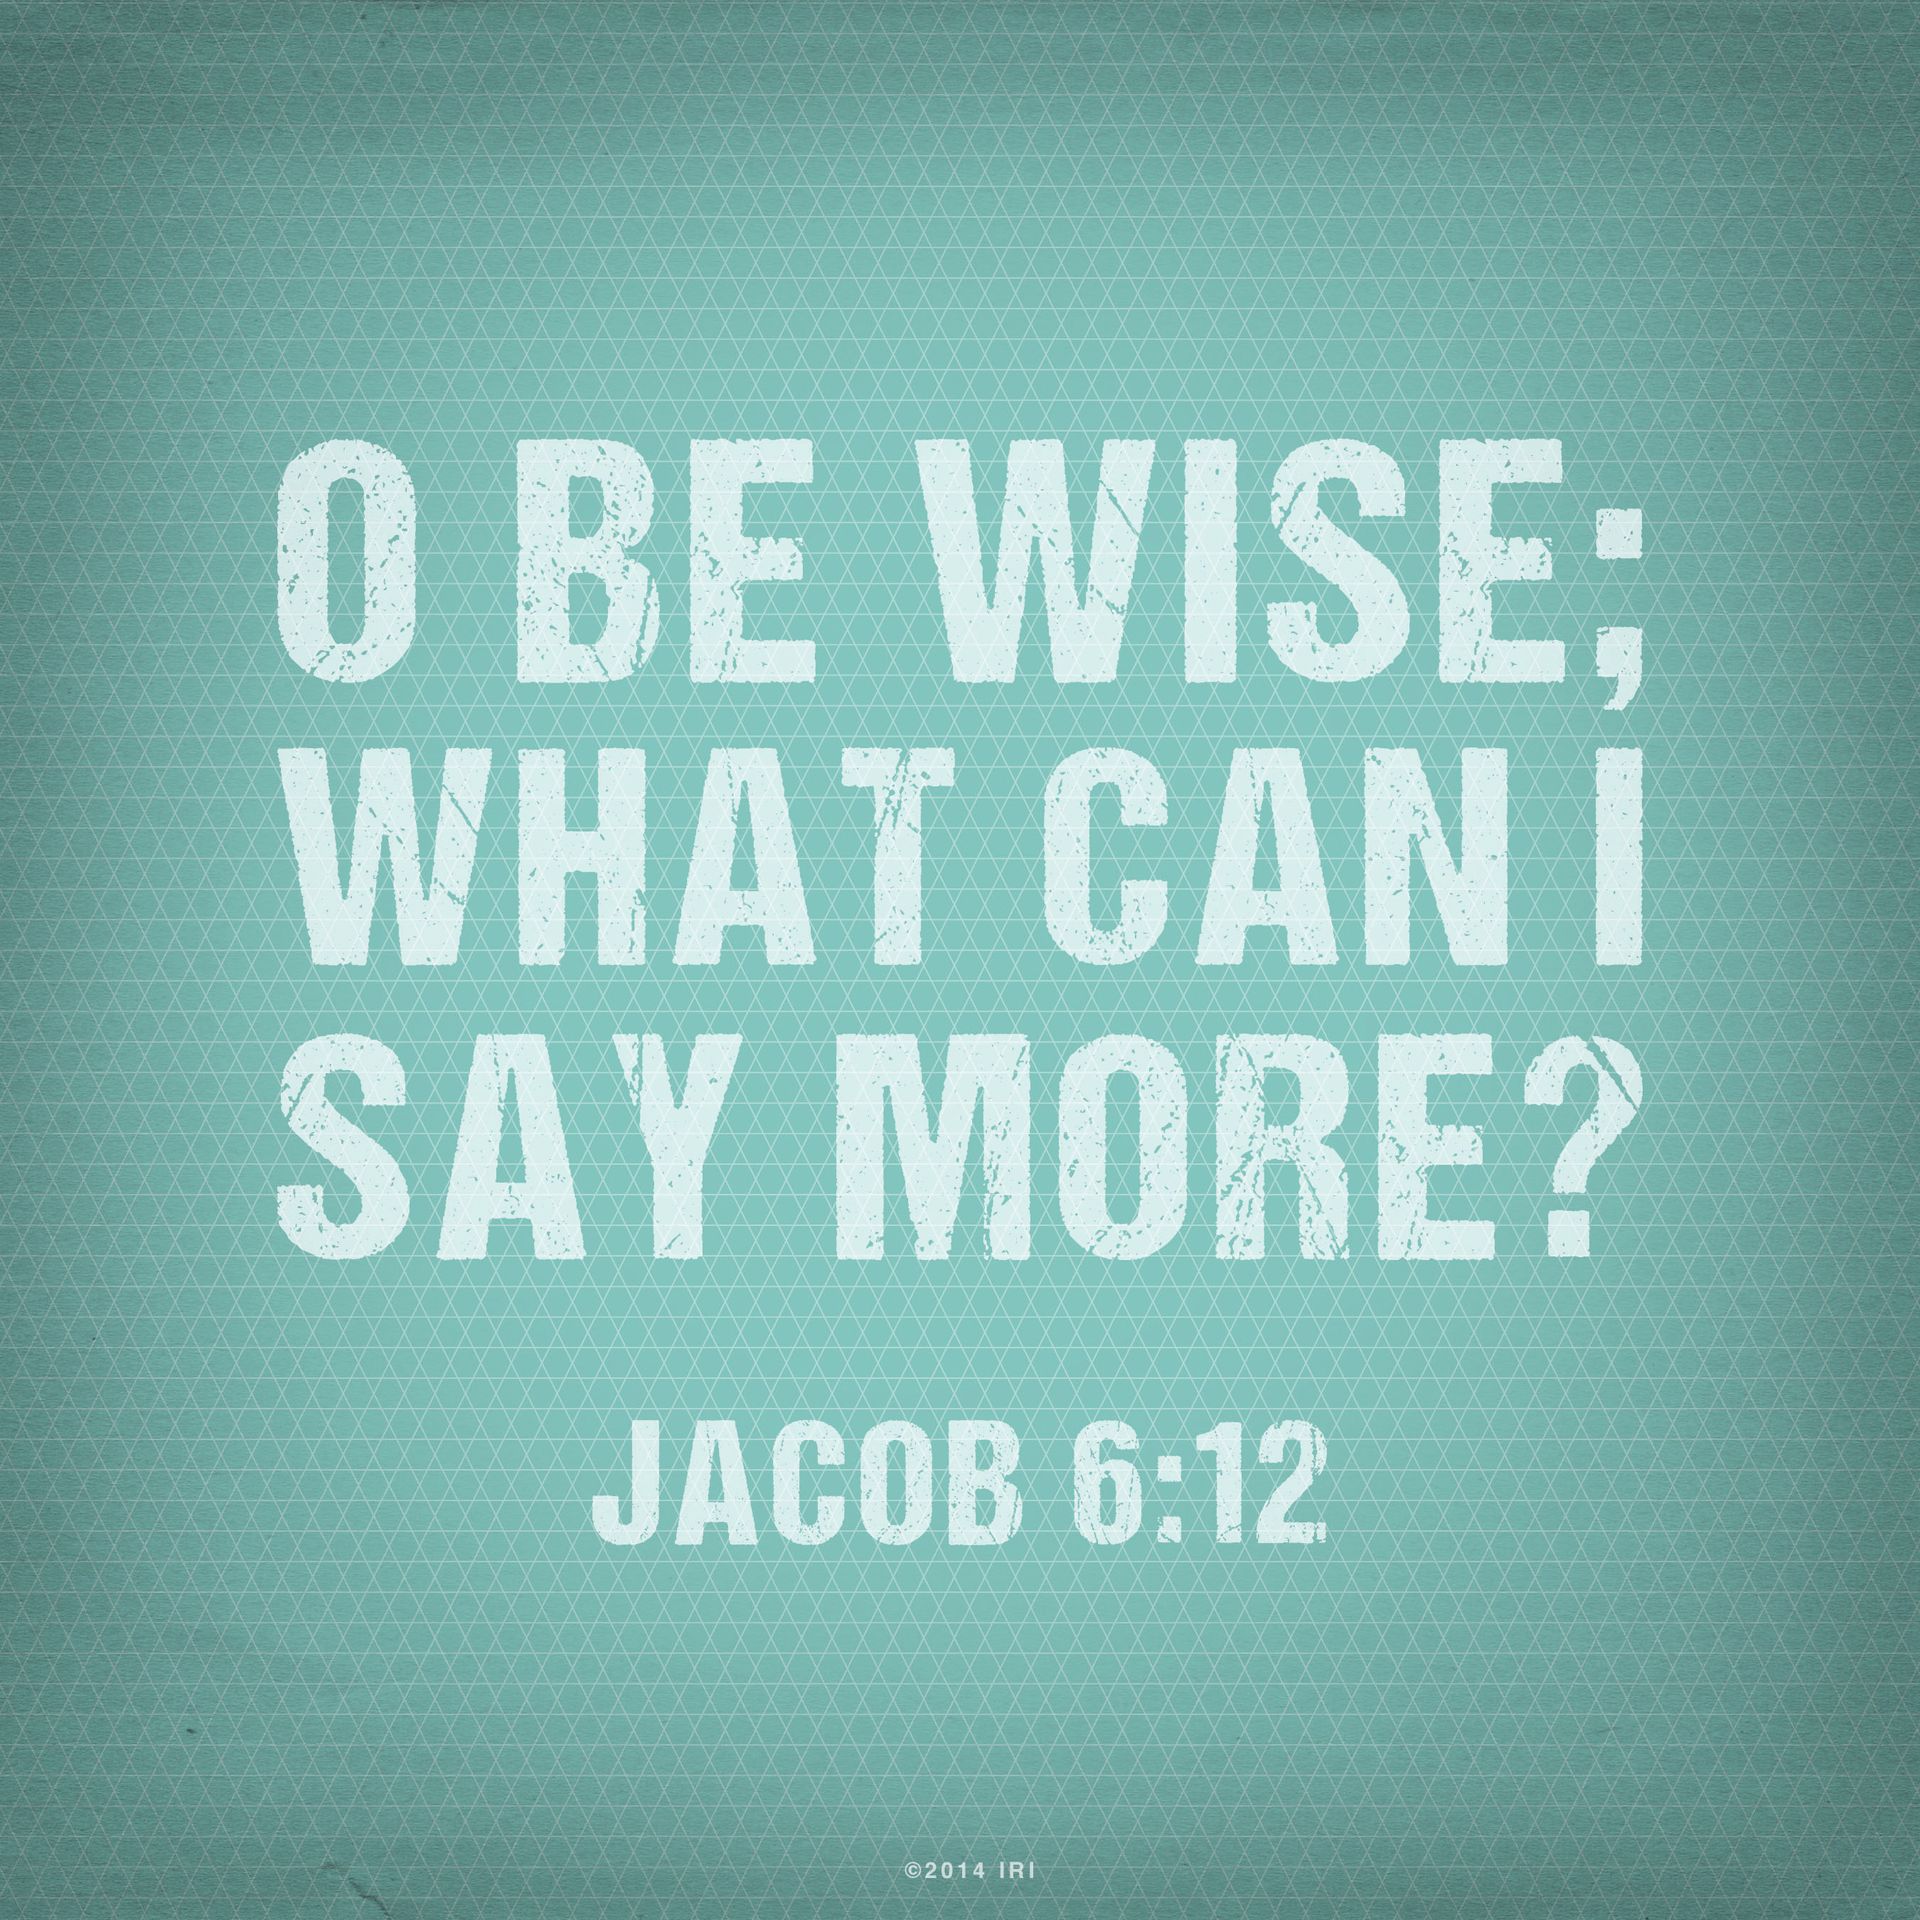 “O be wise; what can I say more?”—Jacob 6:12